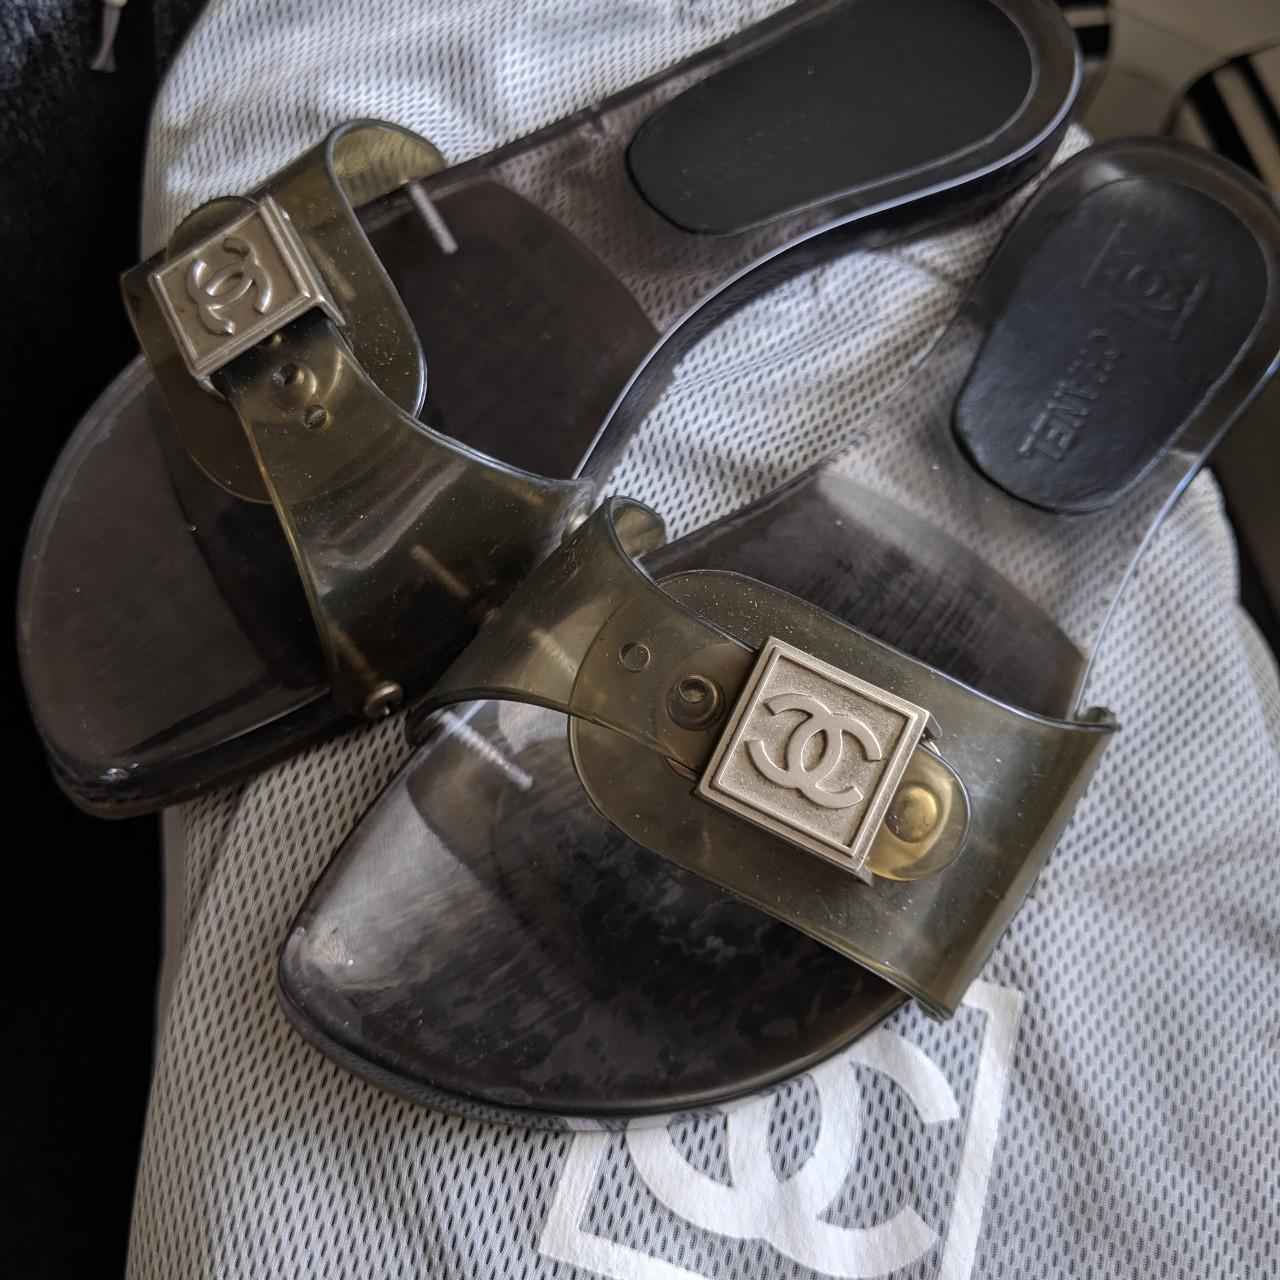 chanel jelly sandals